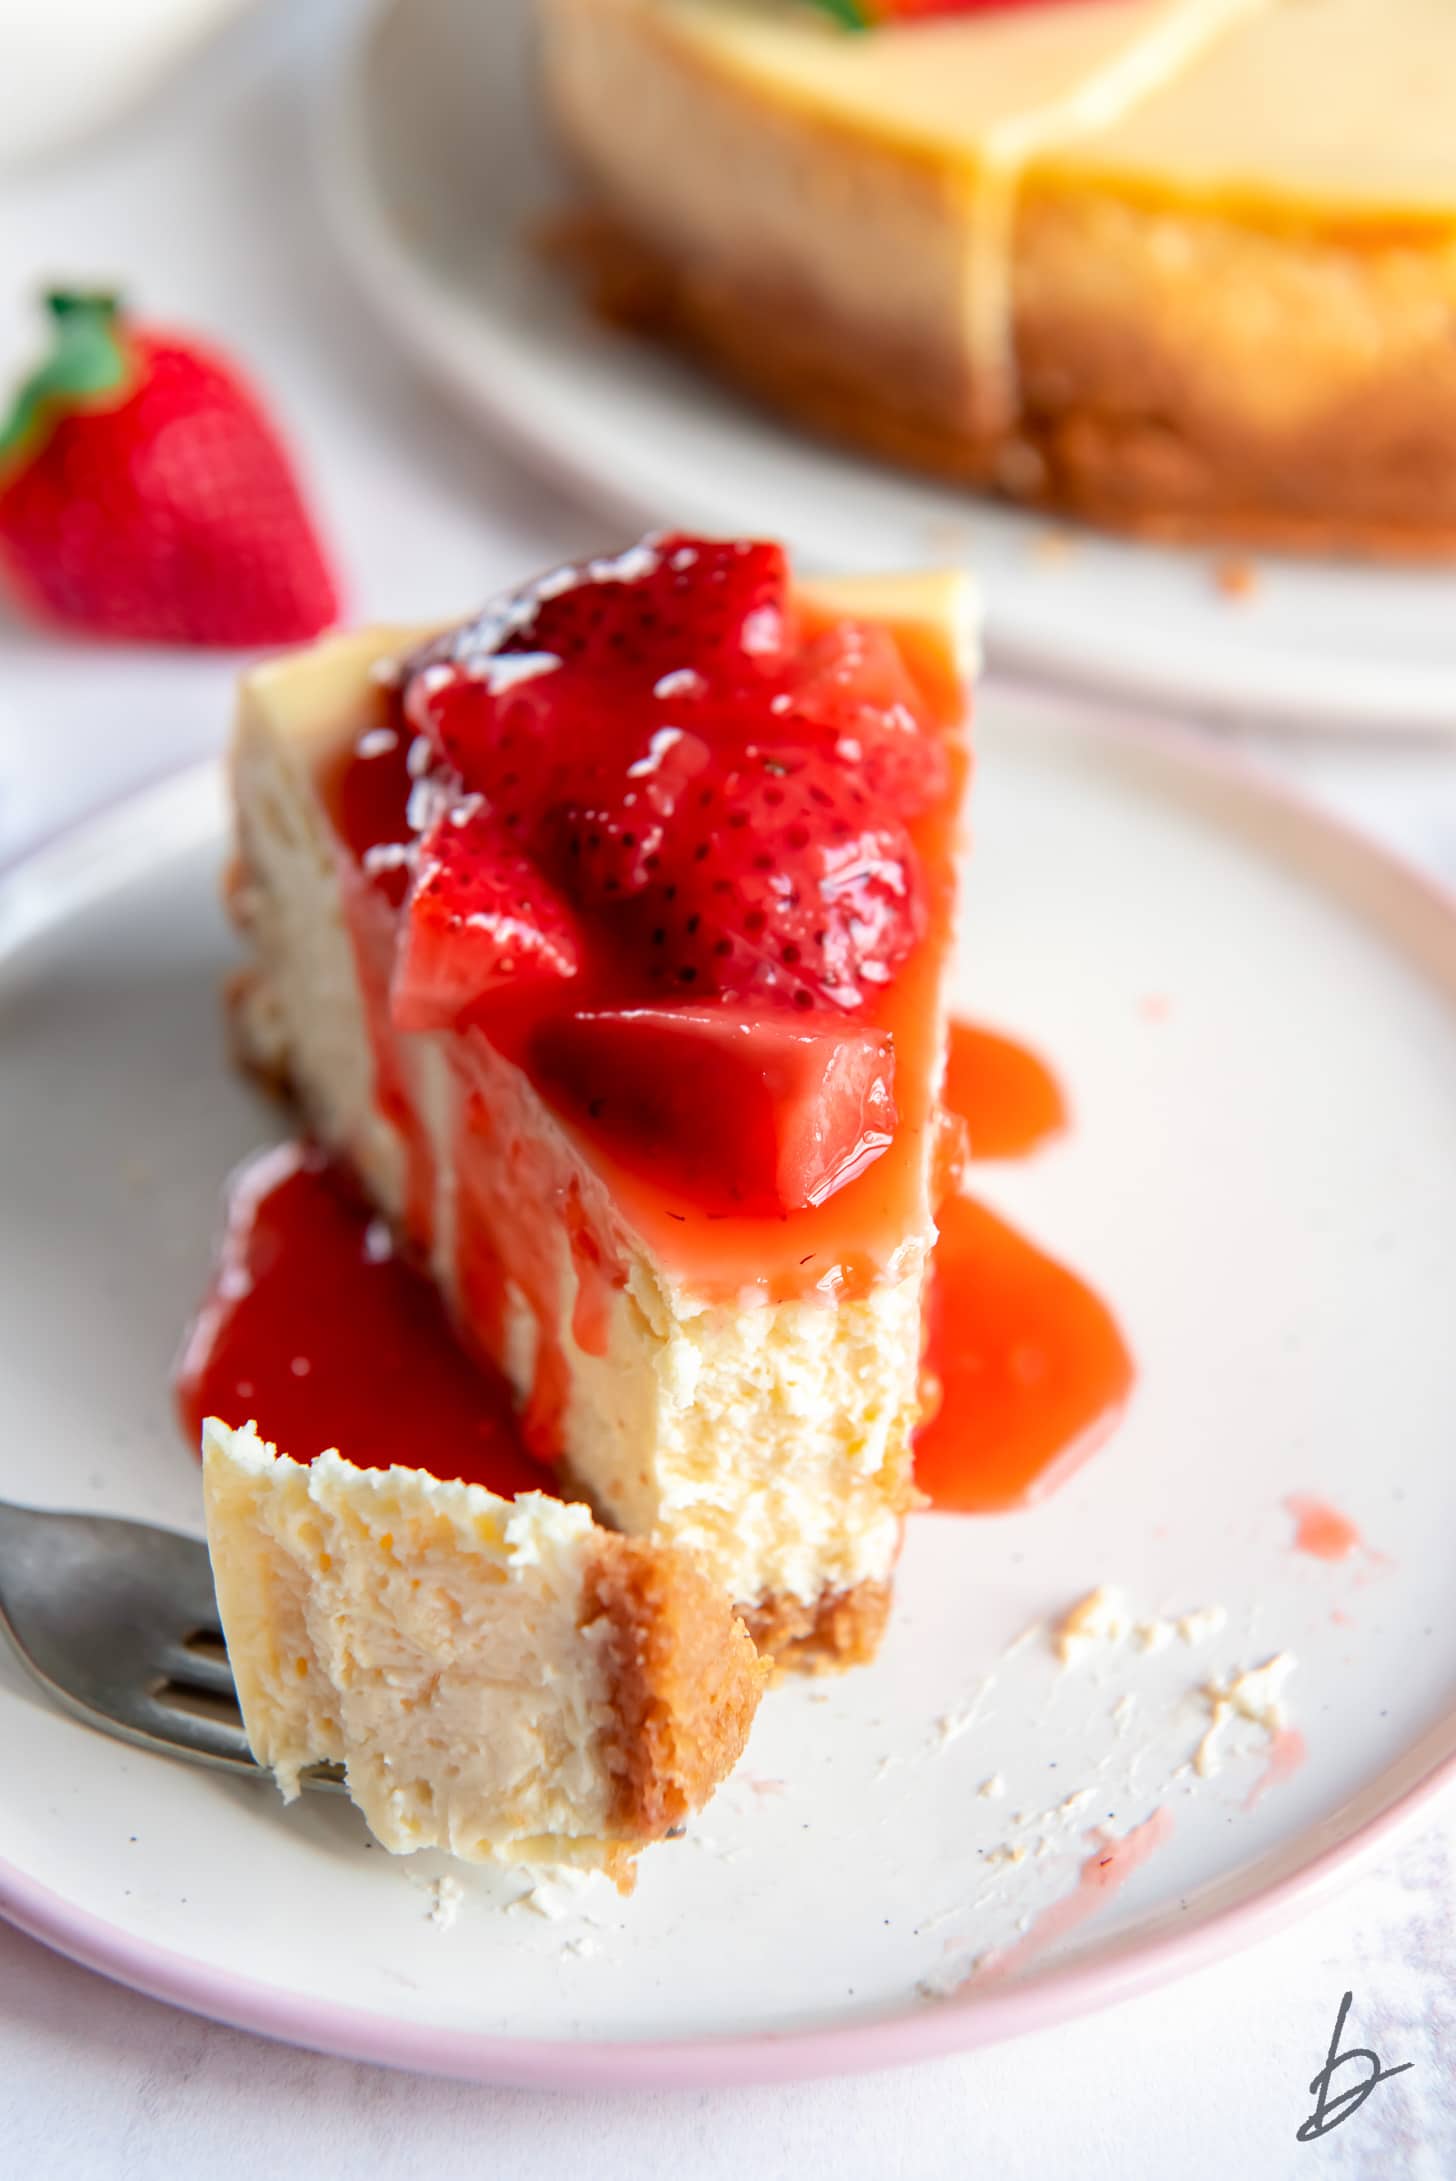 cheesecake slice on plate with strawberry sauce and fork taking bite